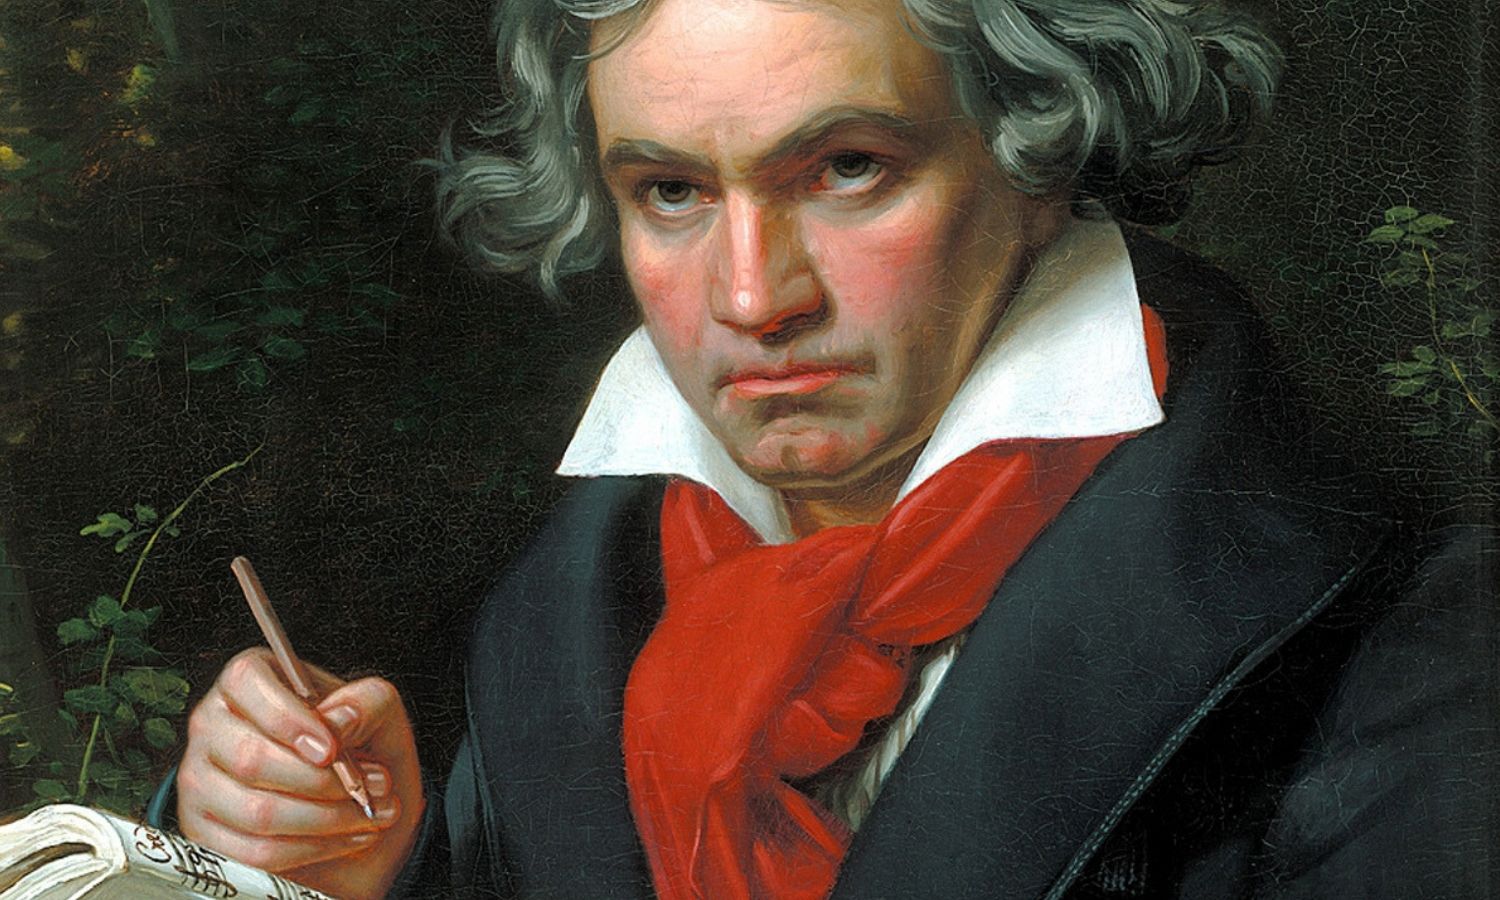 OTD in 1800: Beethoven performed his first concert "for his benefit" at Austria's Royal Imperial Court Theatre.